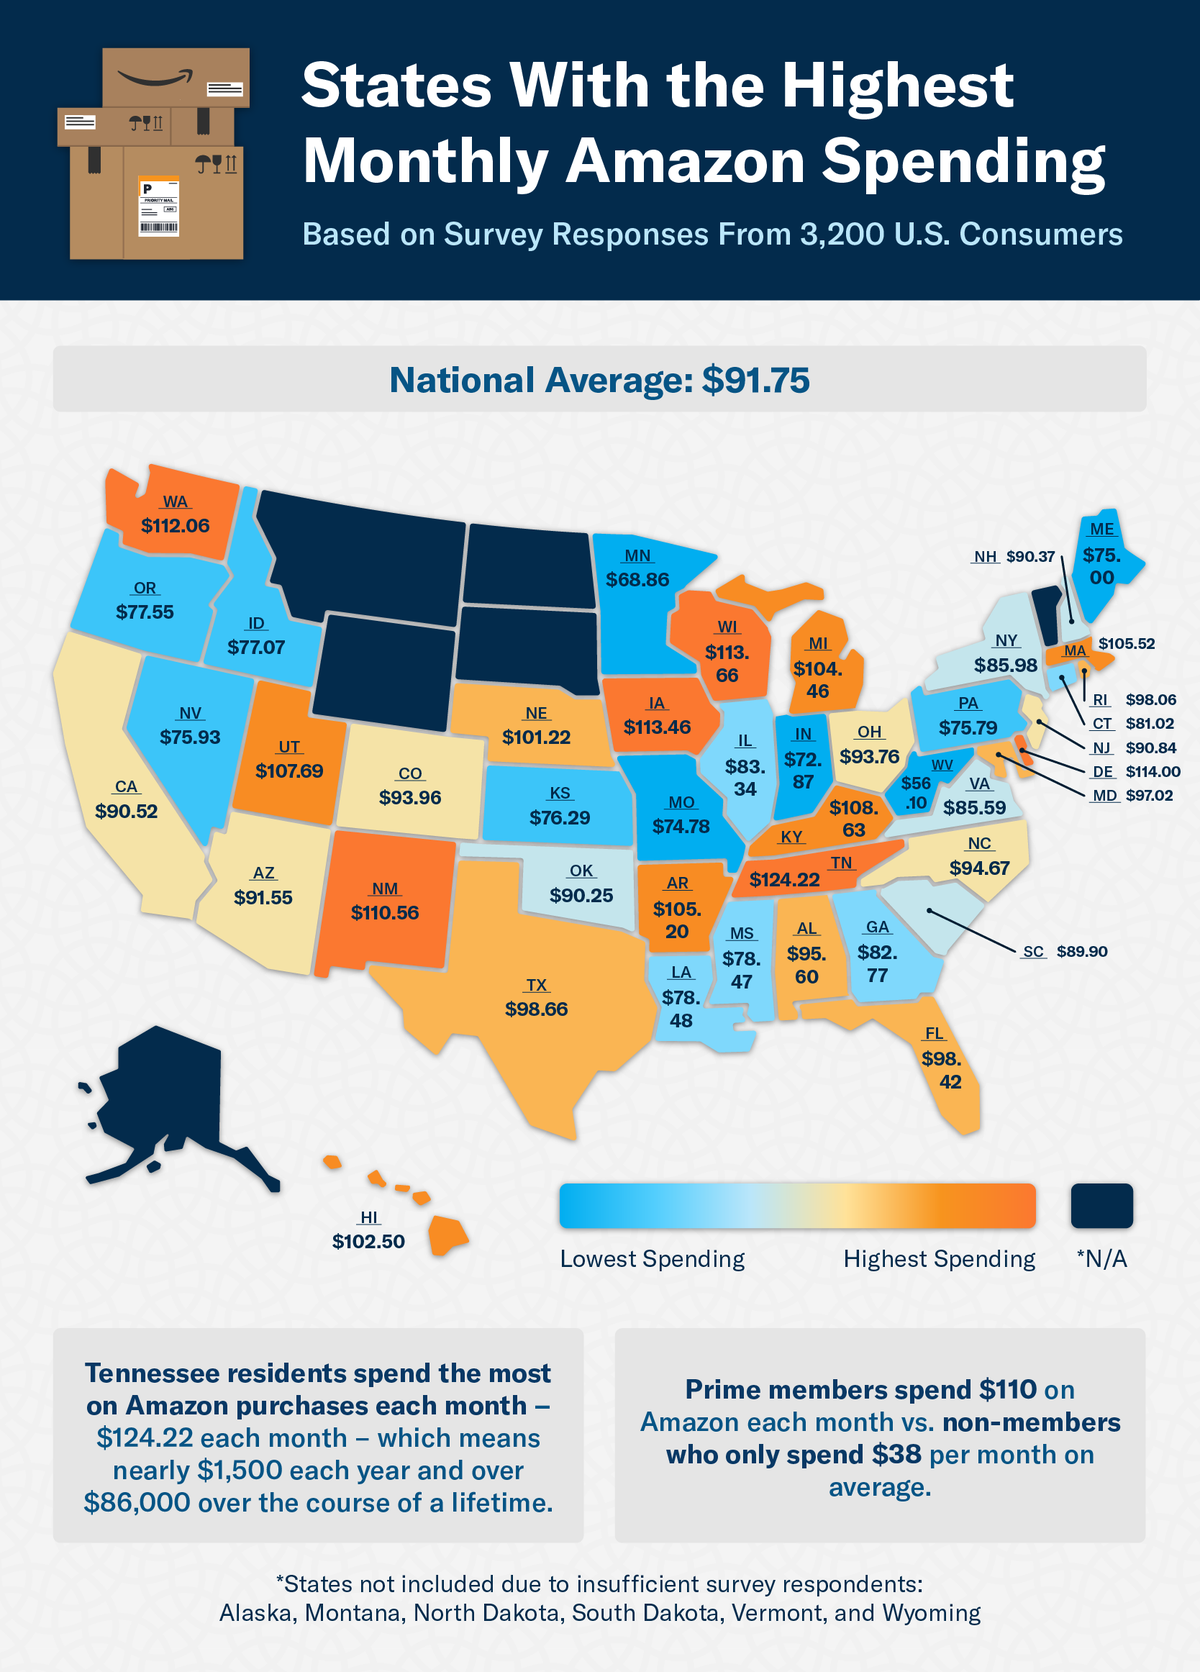 U.S. heatmap showcasing which states spend the most each month on Amazon